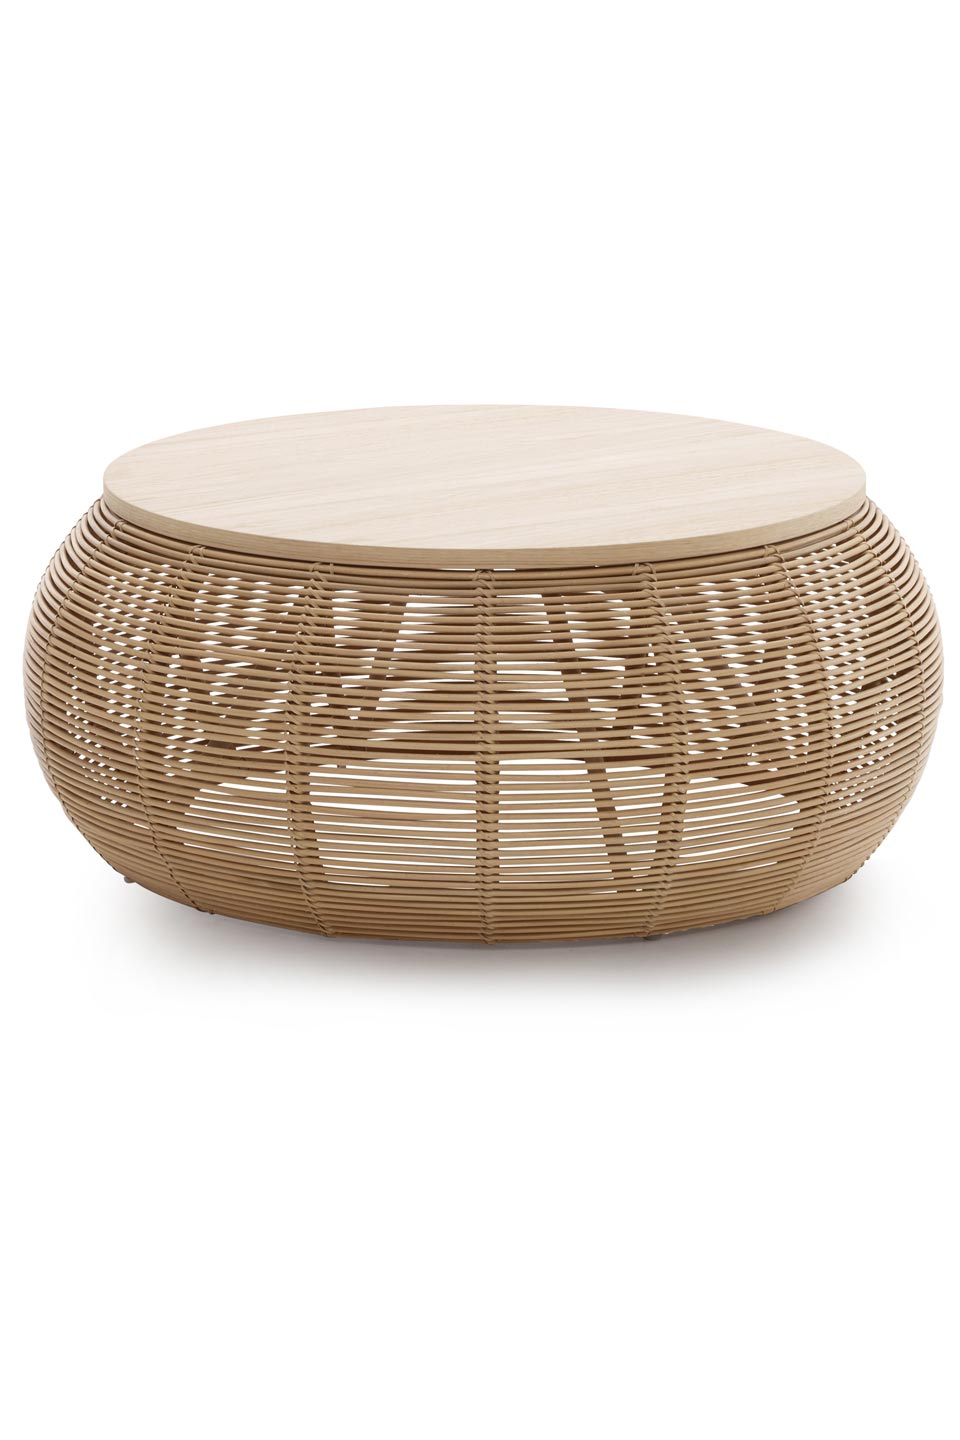 Vivi Large Coffee Table In Natural Rattan Vincent Sheppard Contemporary Design Lighting Rf 18110062